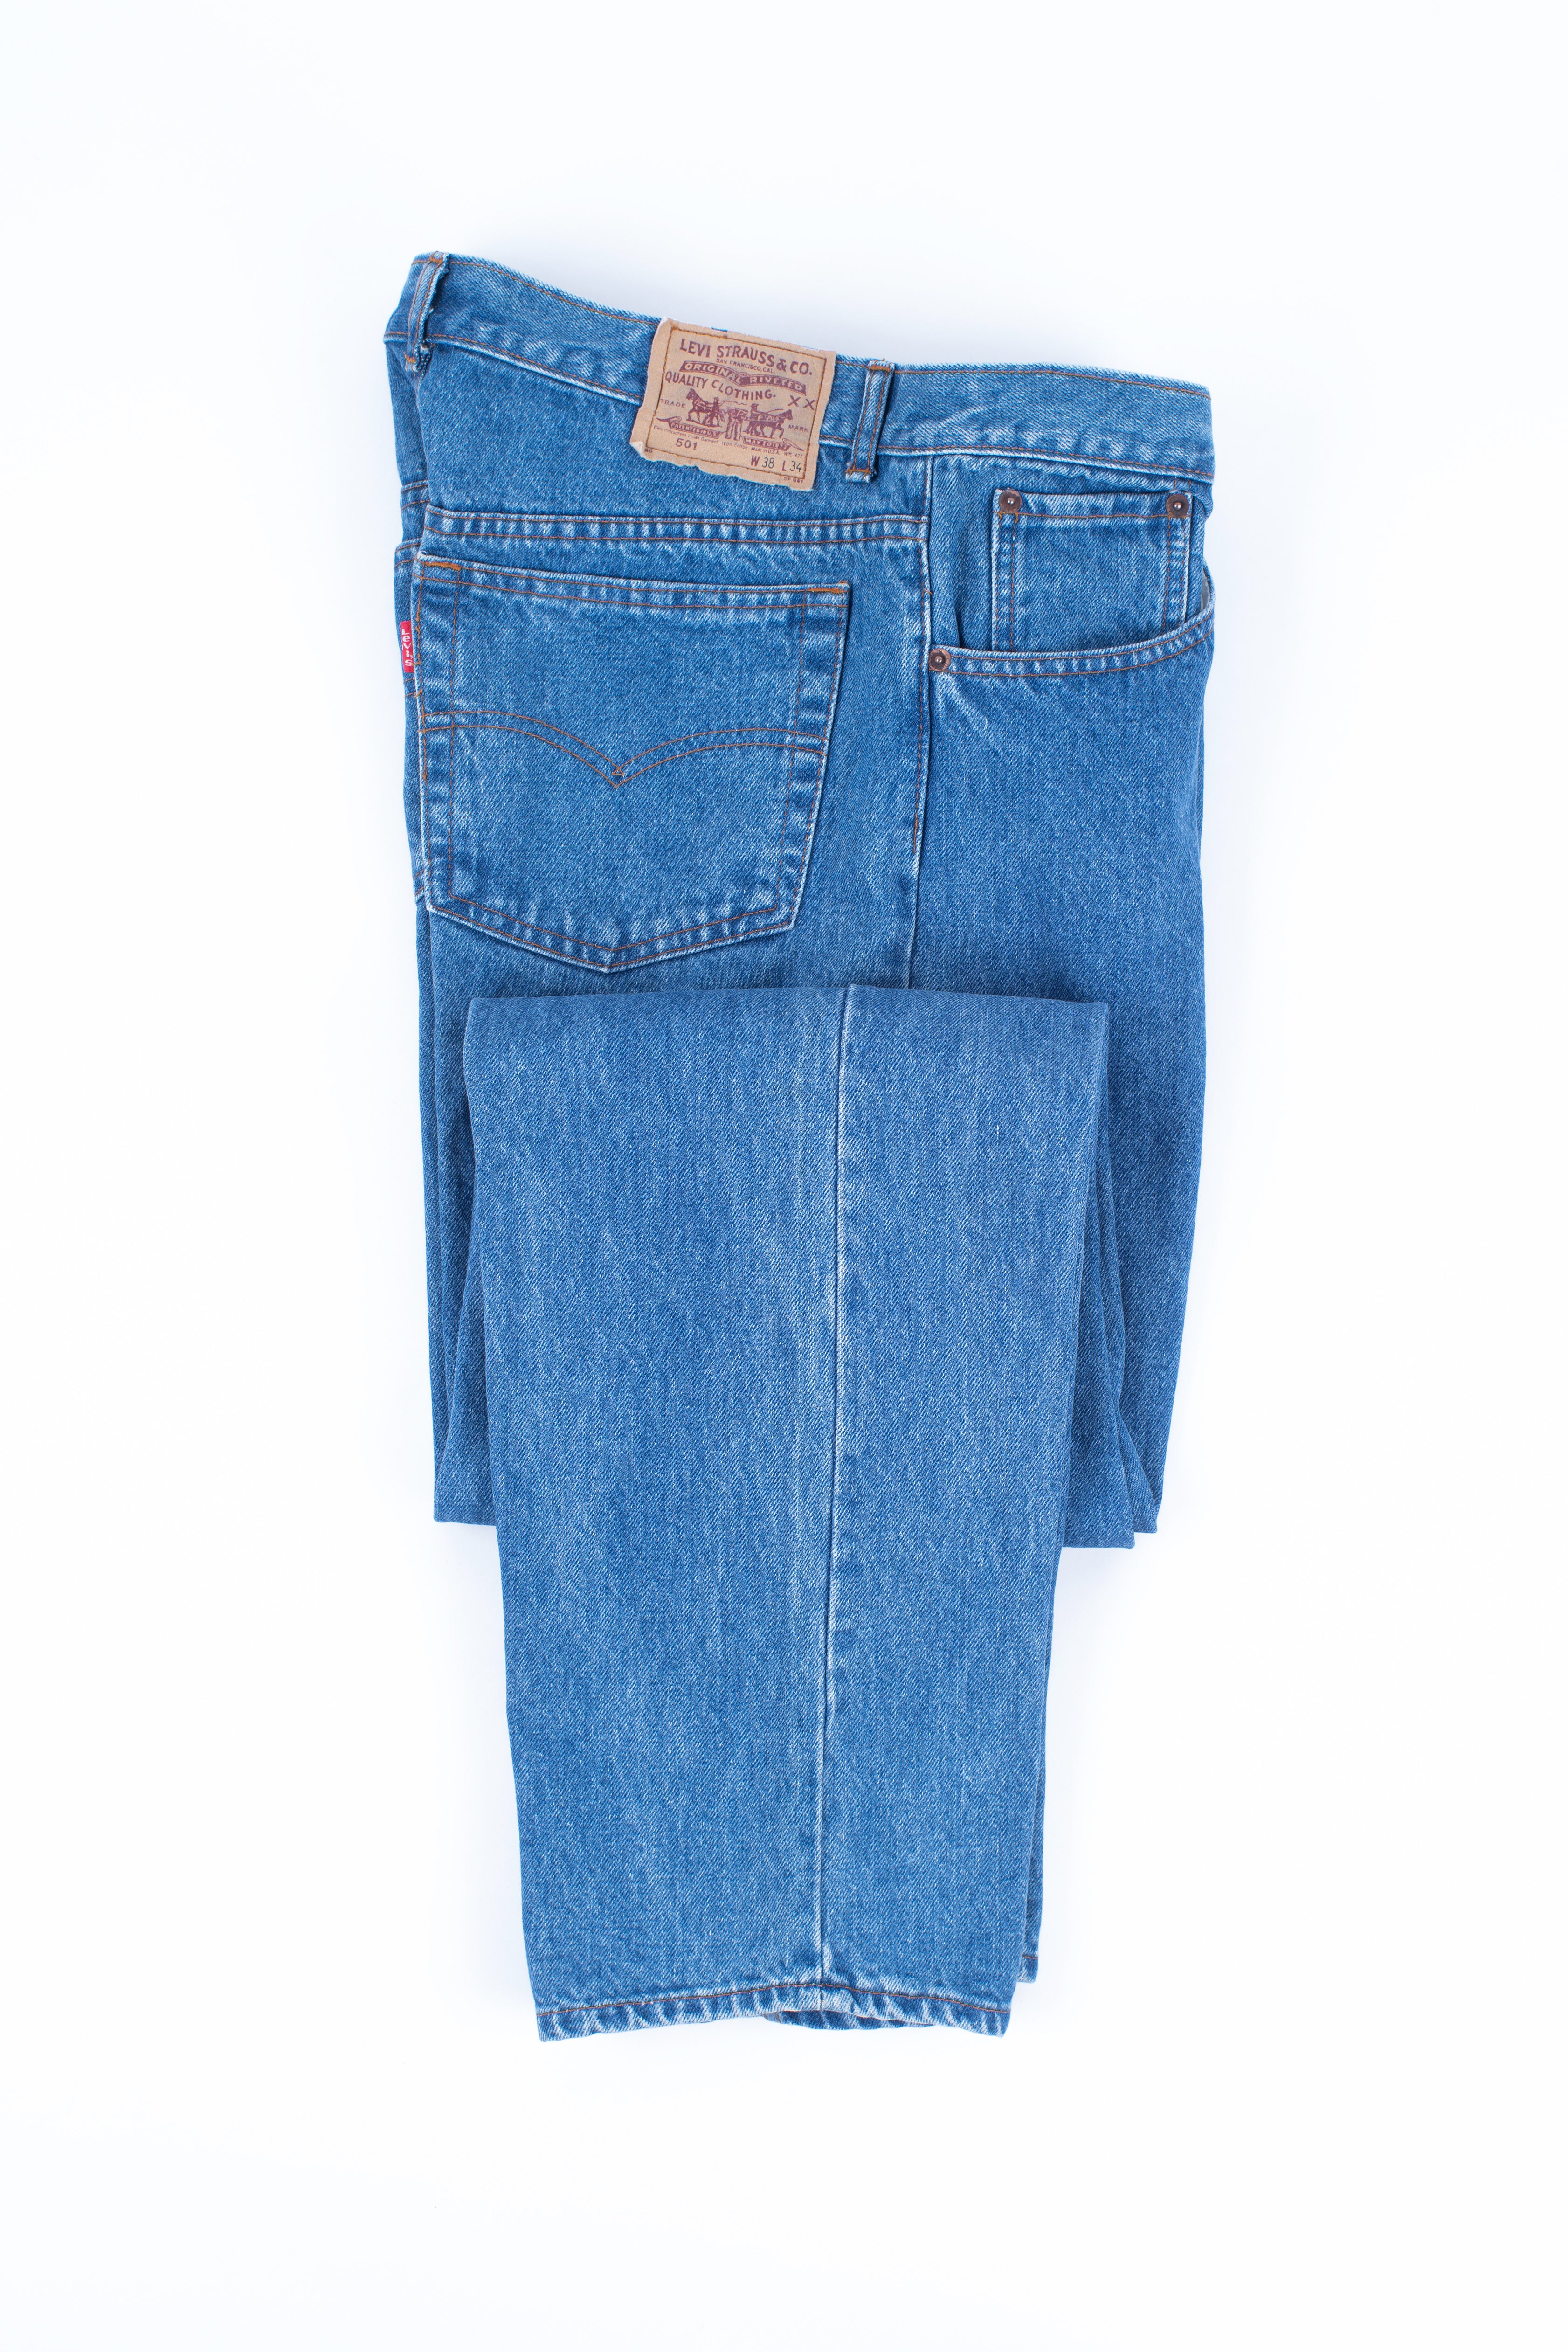 Levi's 501 Men's Vintage Blue Jeans Made in USA, W38/L34 – SecondFirst